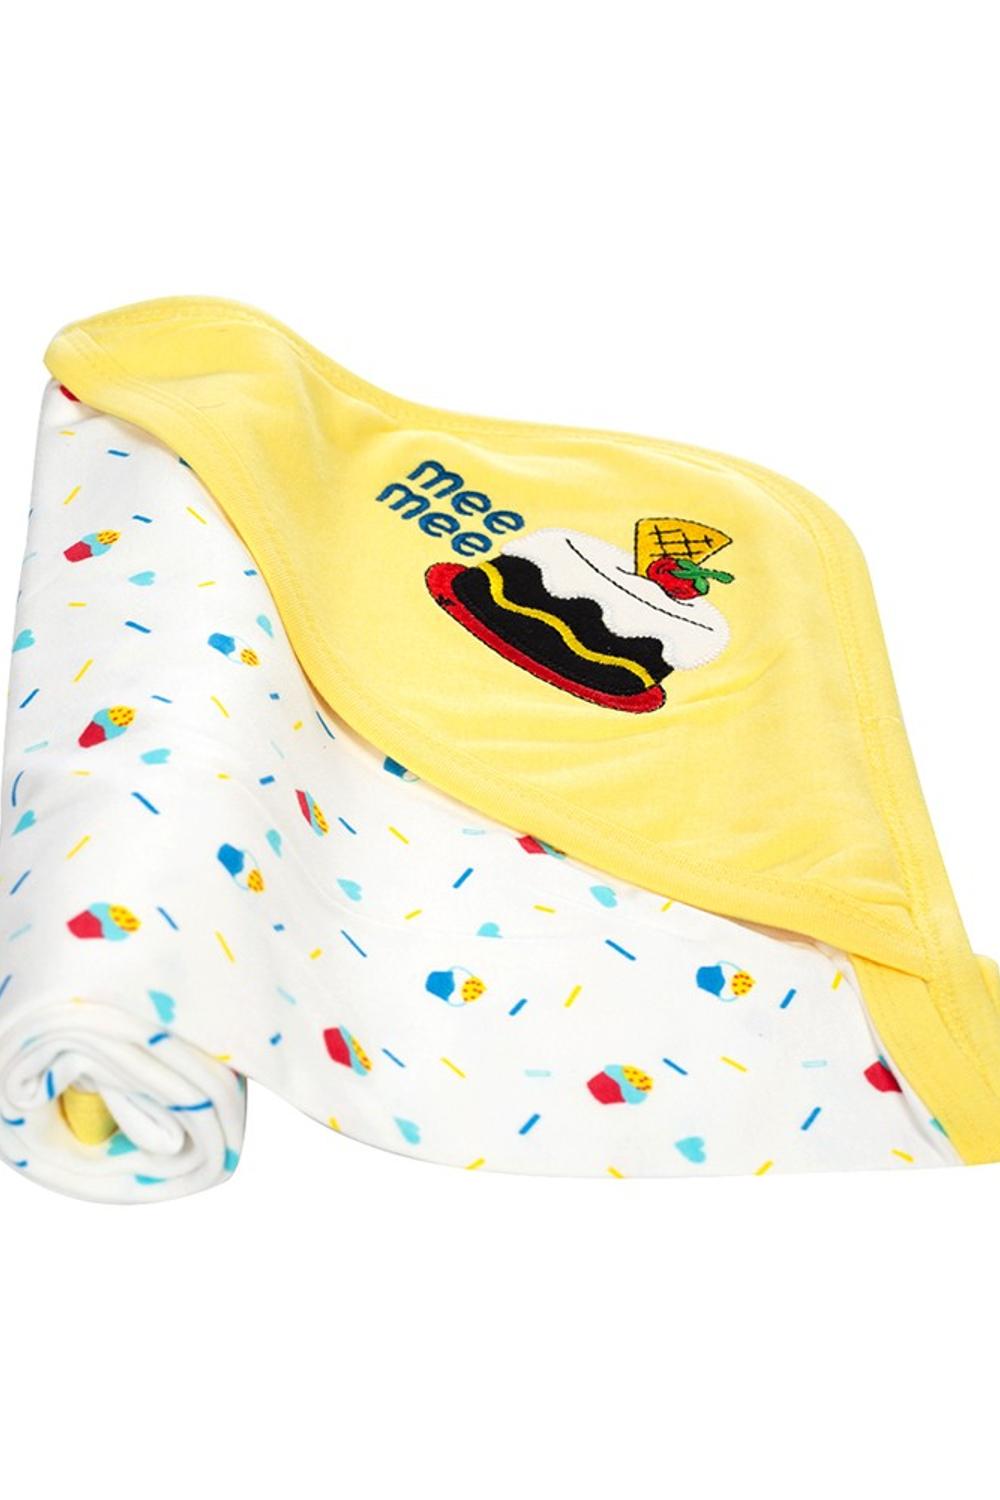 Mee Mee Baby Warm and Soft Swaddle Wrapper with Hood Single Layer for New born 0 to 6 months